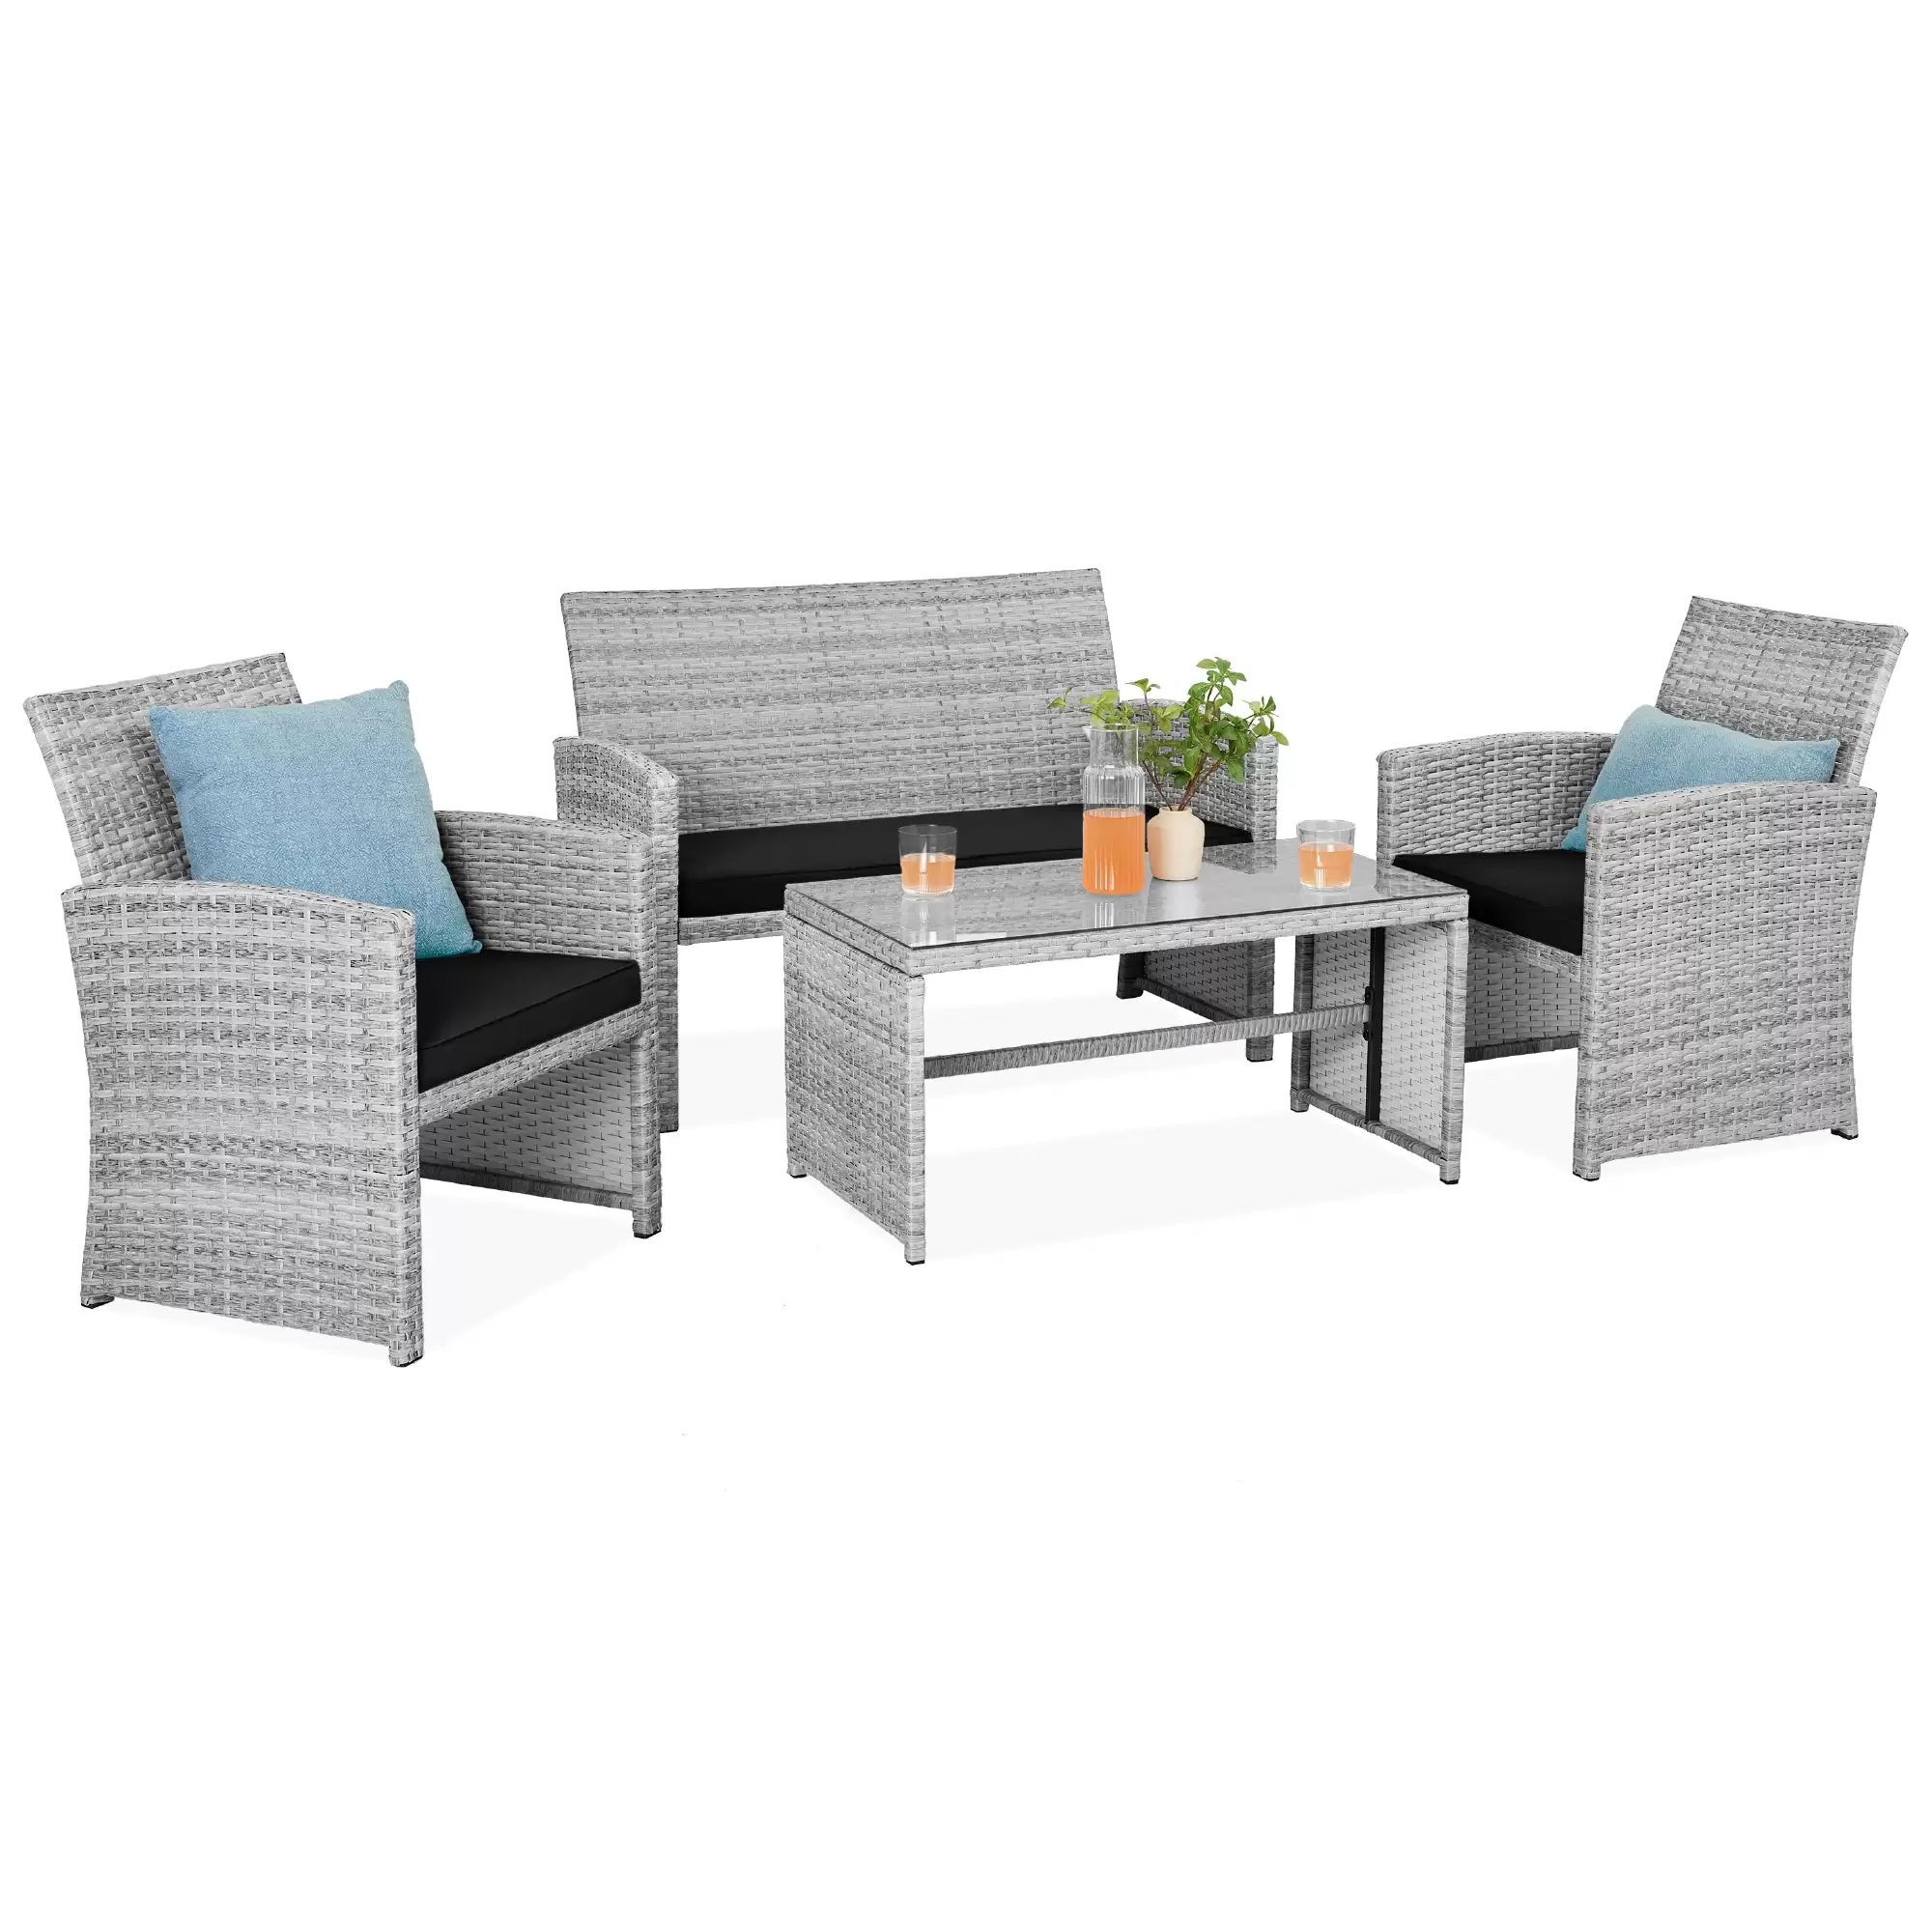 Starting At $109.99 4-piece Outdoor Wicker Conversation Patio Set W/ 4 Seats, Glass Table Top At Bestchoiceproducts